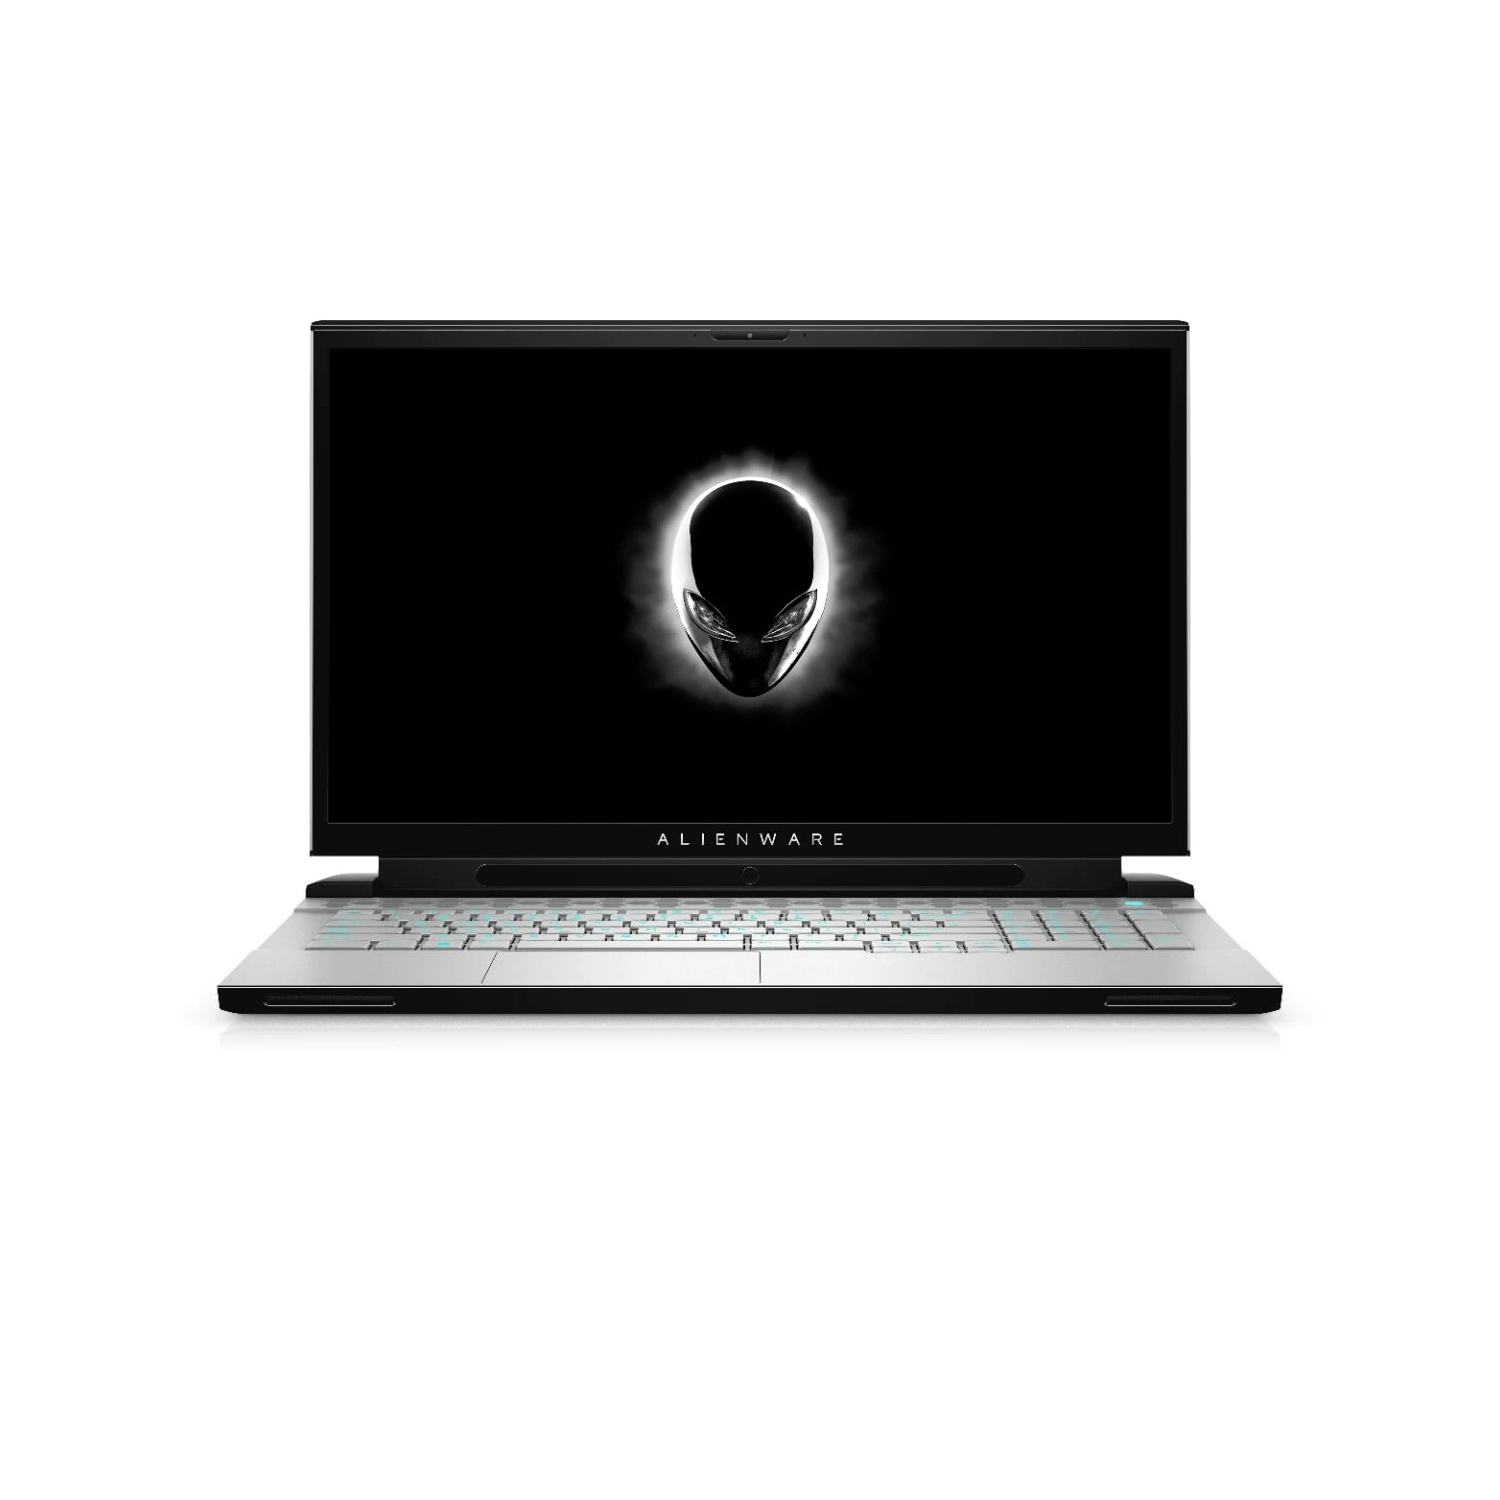 Refurbished (Excellent) - Dell Alienware m17 R2 Gaming Laptop (2019) | 17.3" FHD | Core i7 - 512GB SSD - 16GB RAM - RTX 2070 | 6 Cores @ 4.5 GHz Certified Refurbished